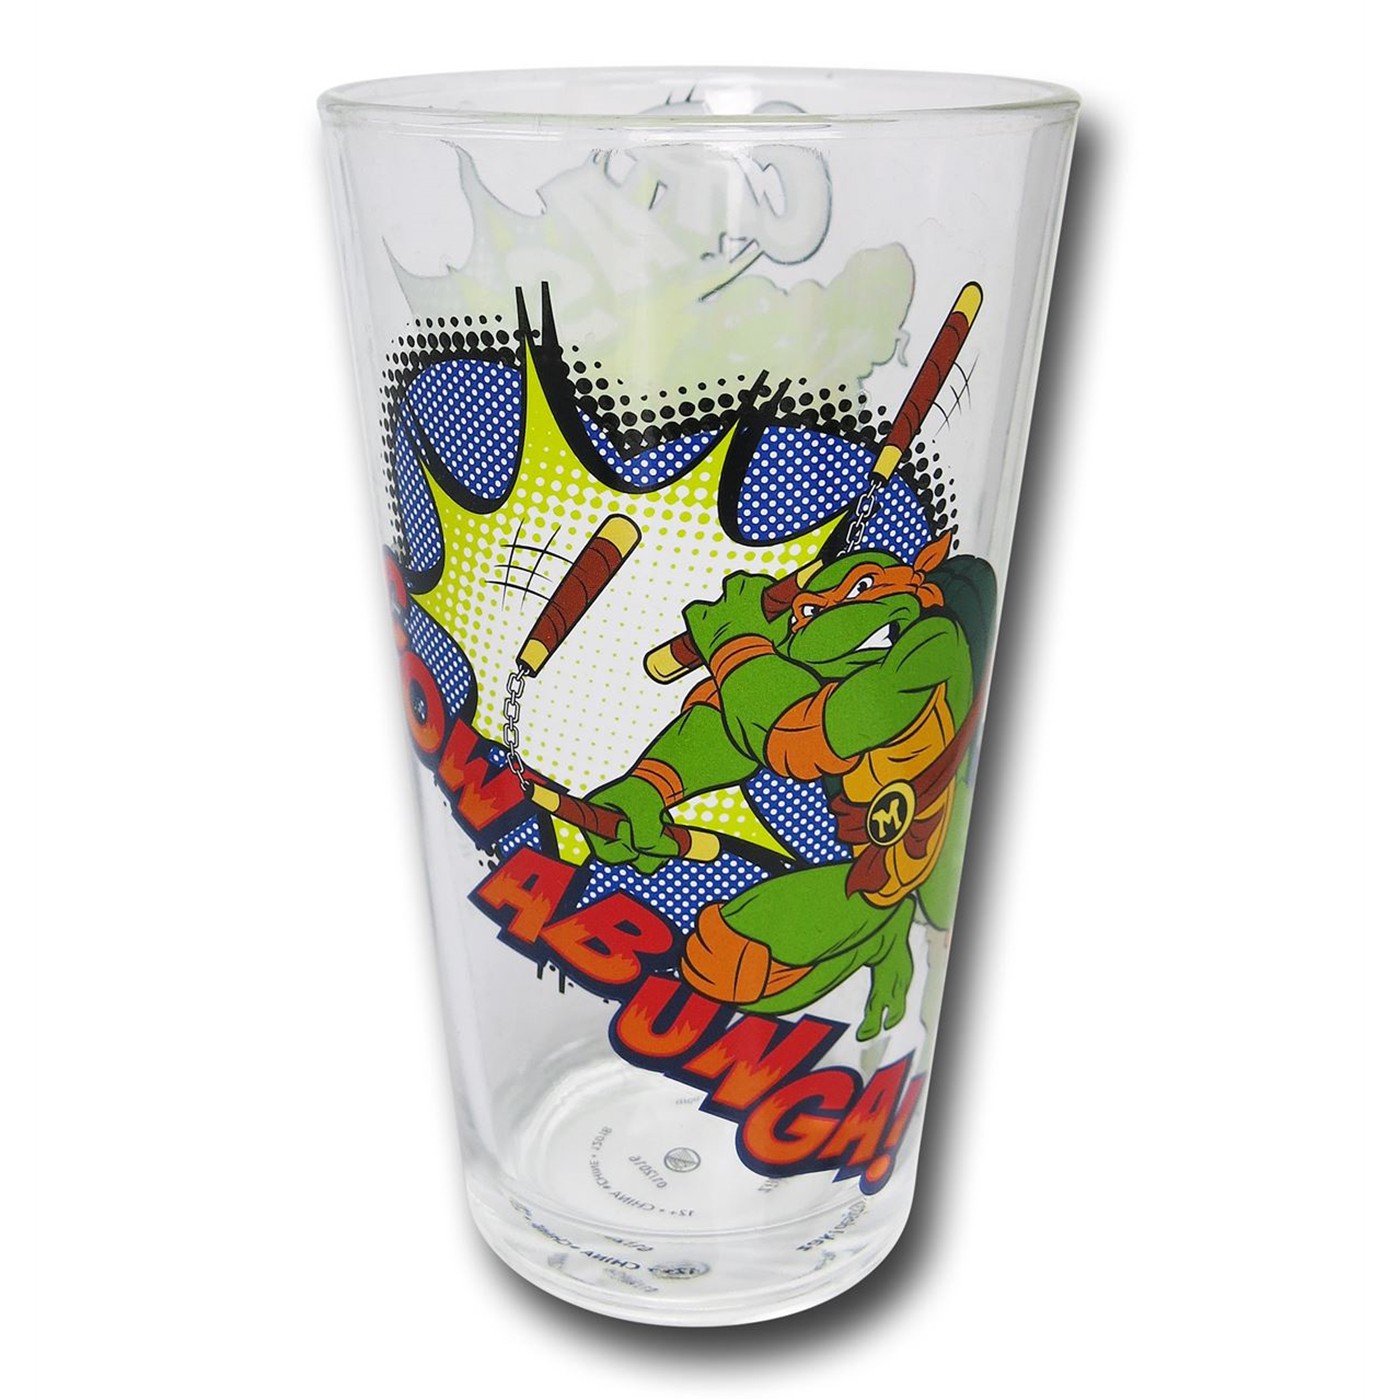 TMNT Action Pint Glass Set of 4